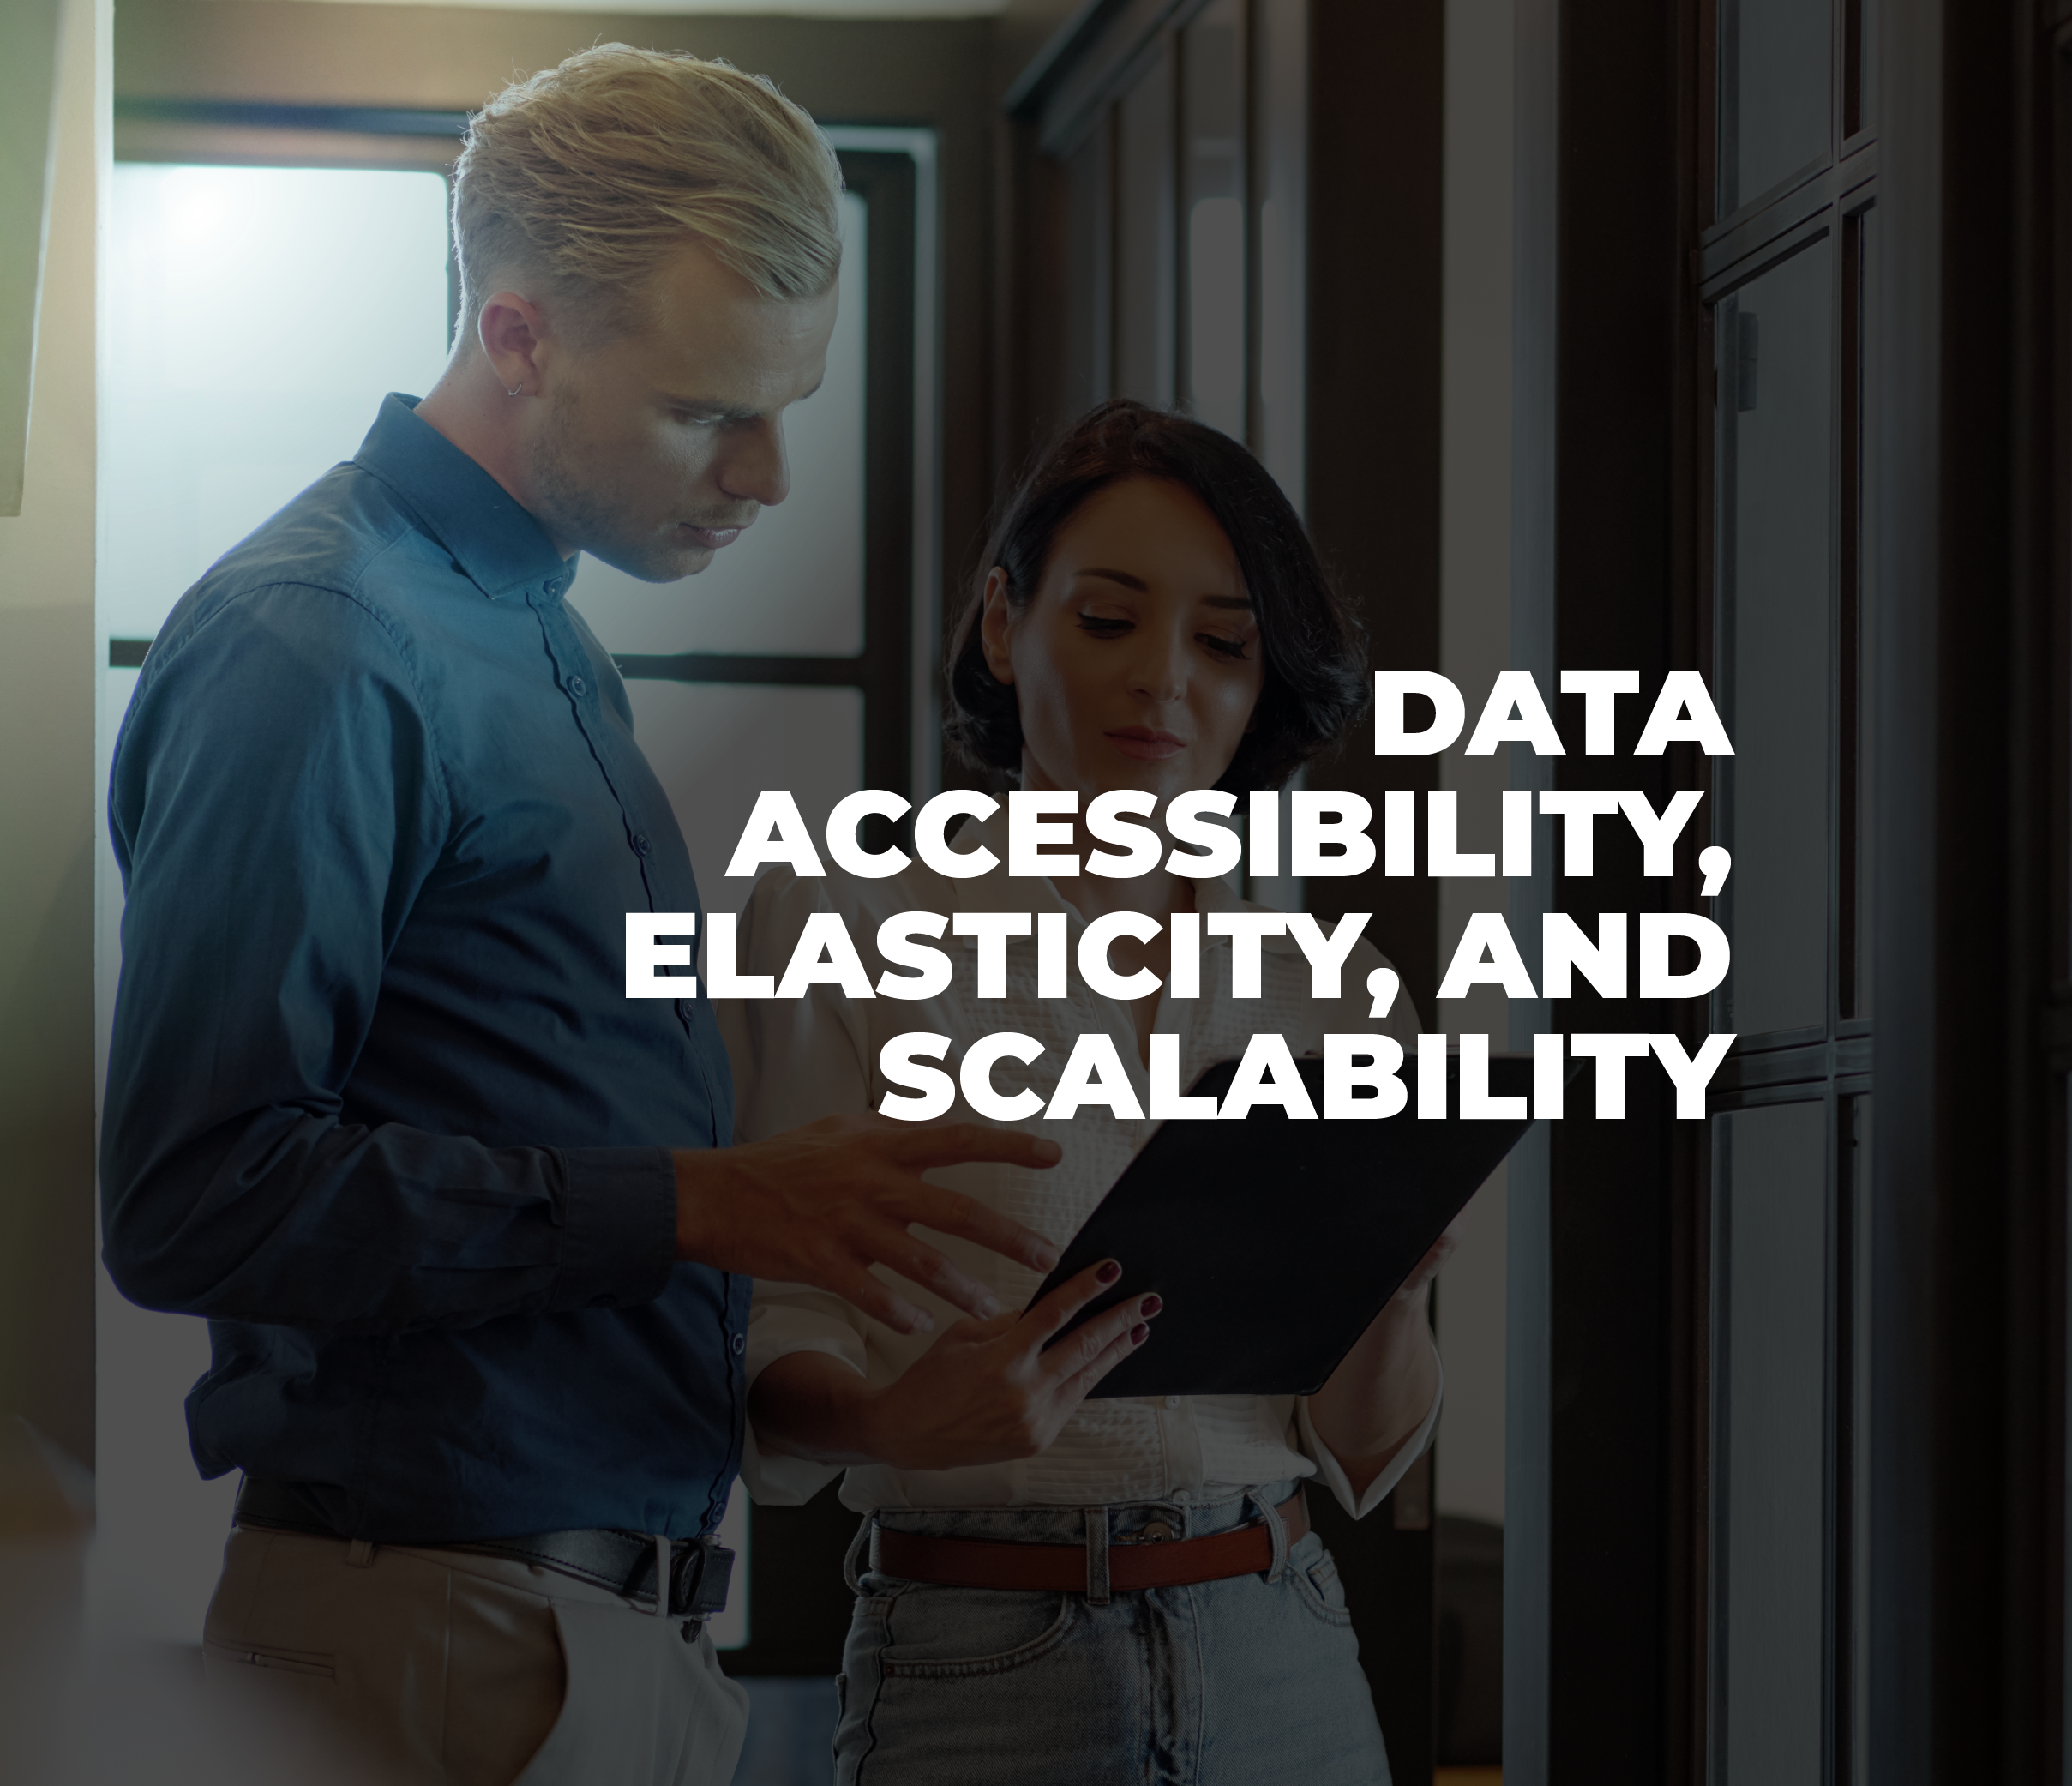 Content_ITDataScientists_DataAccessibility